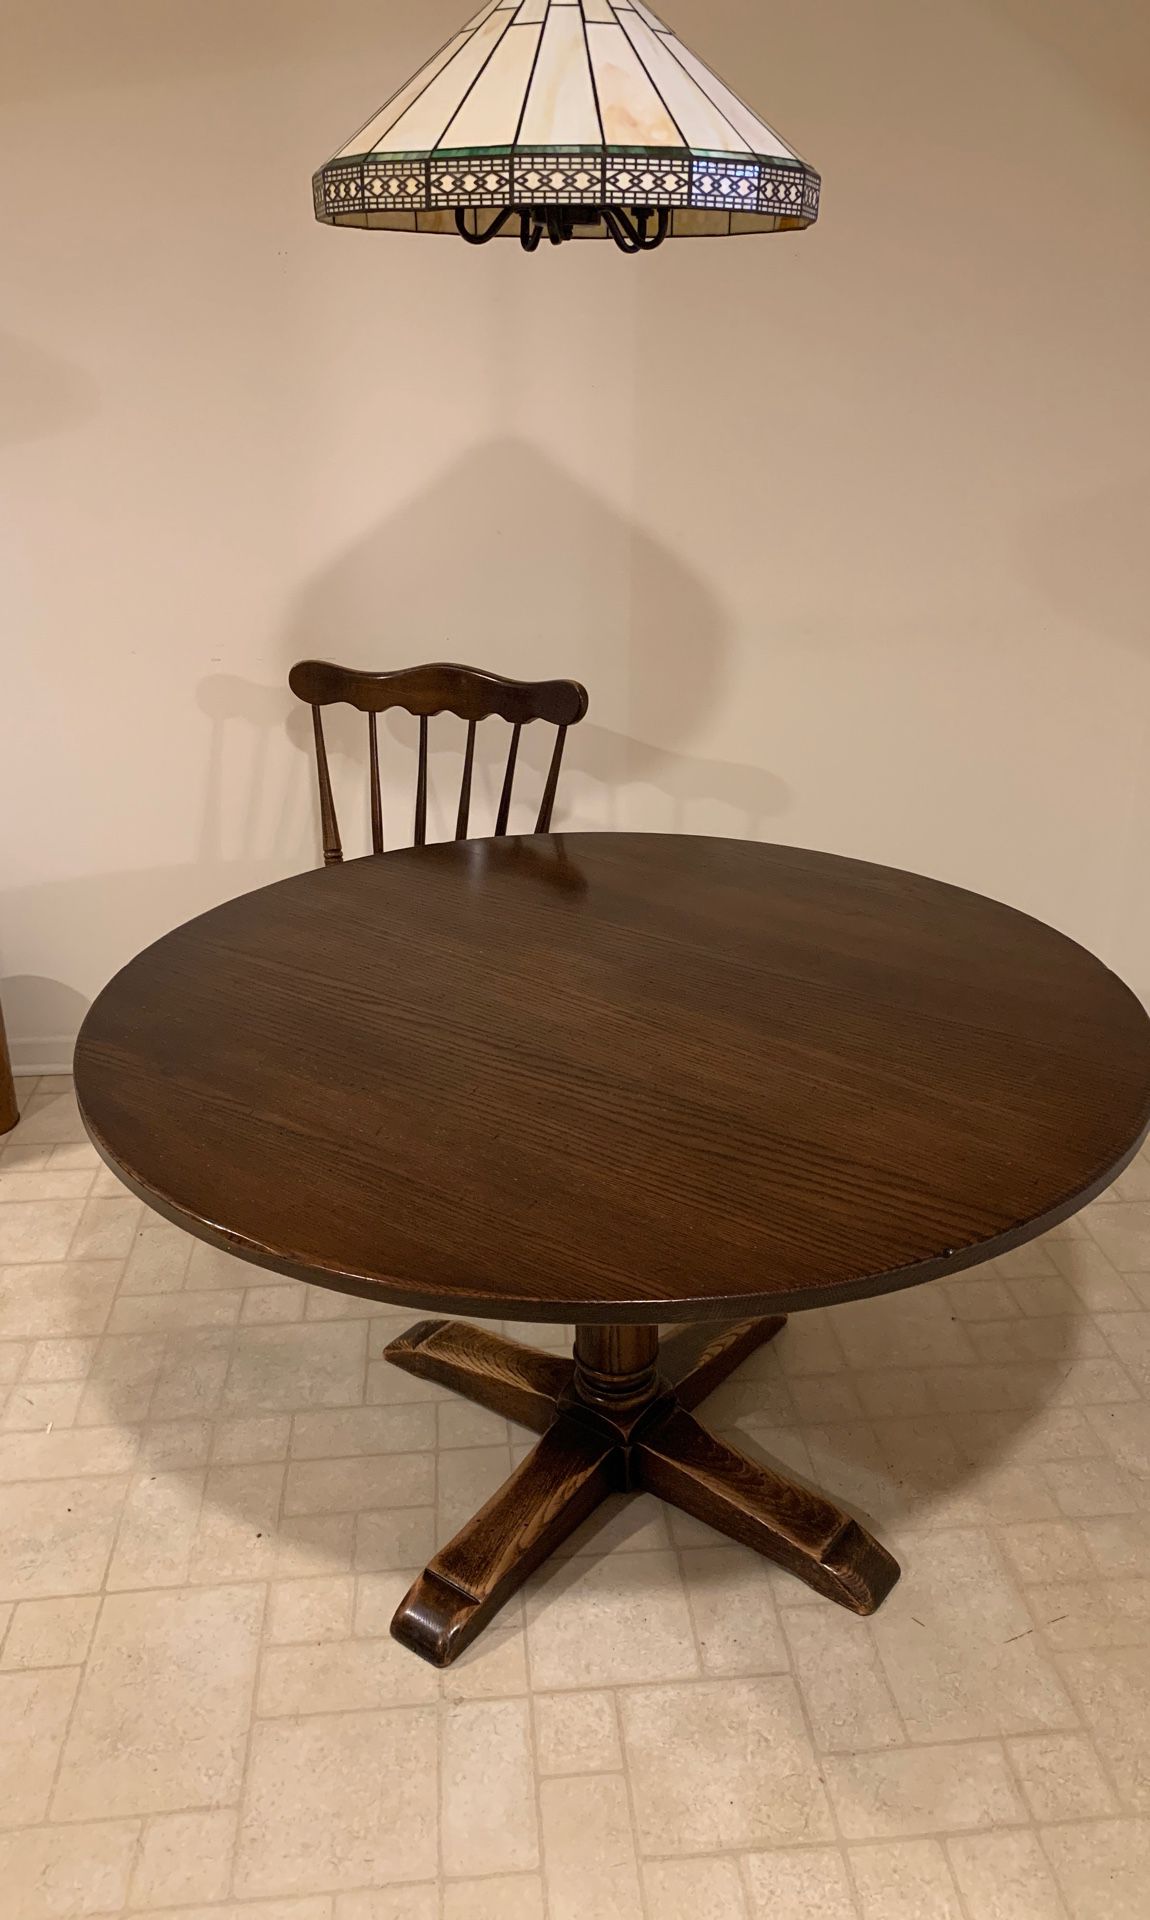 Kitchen or dining table with chair